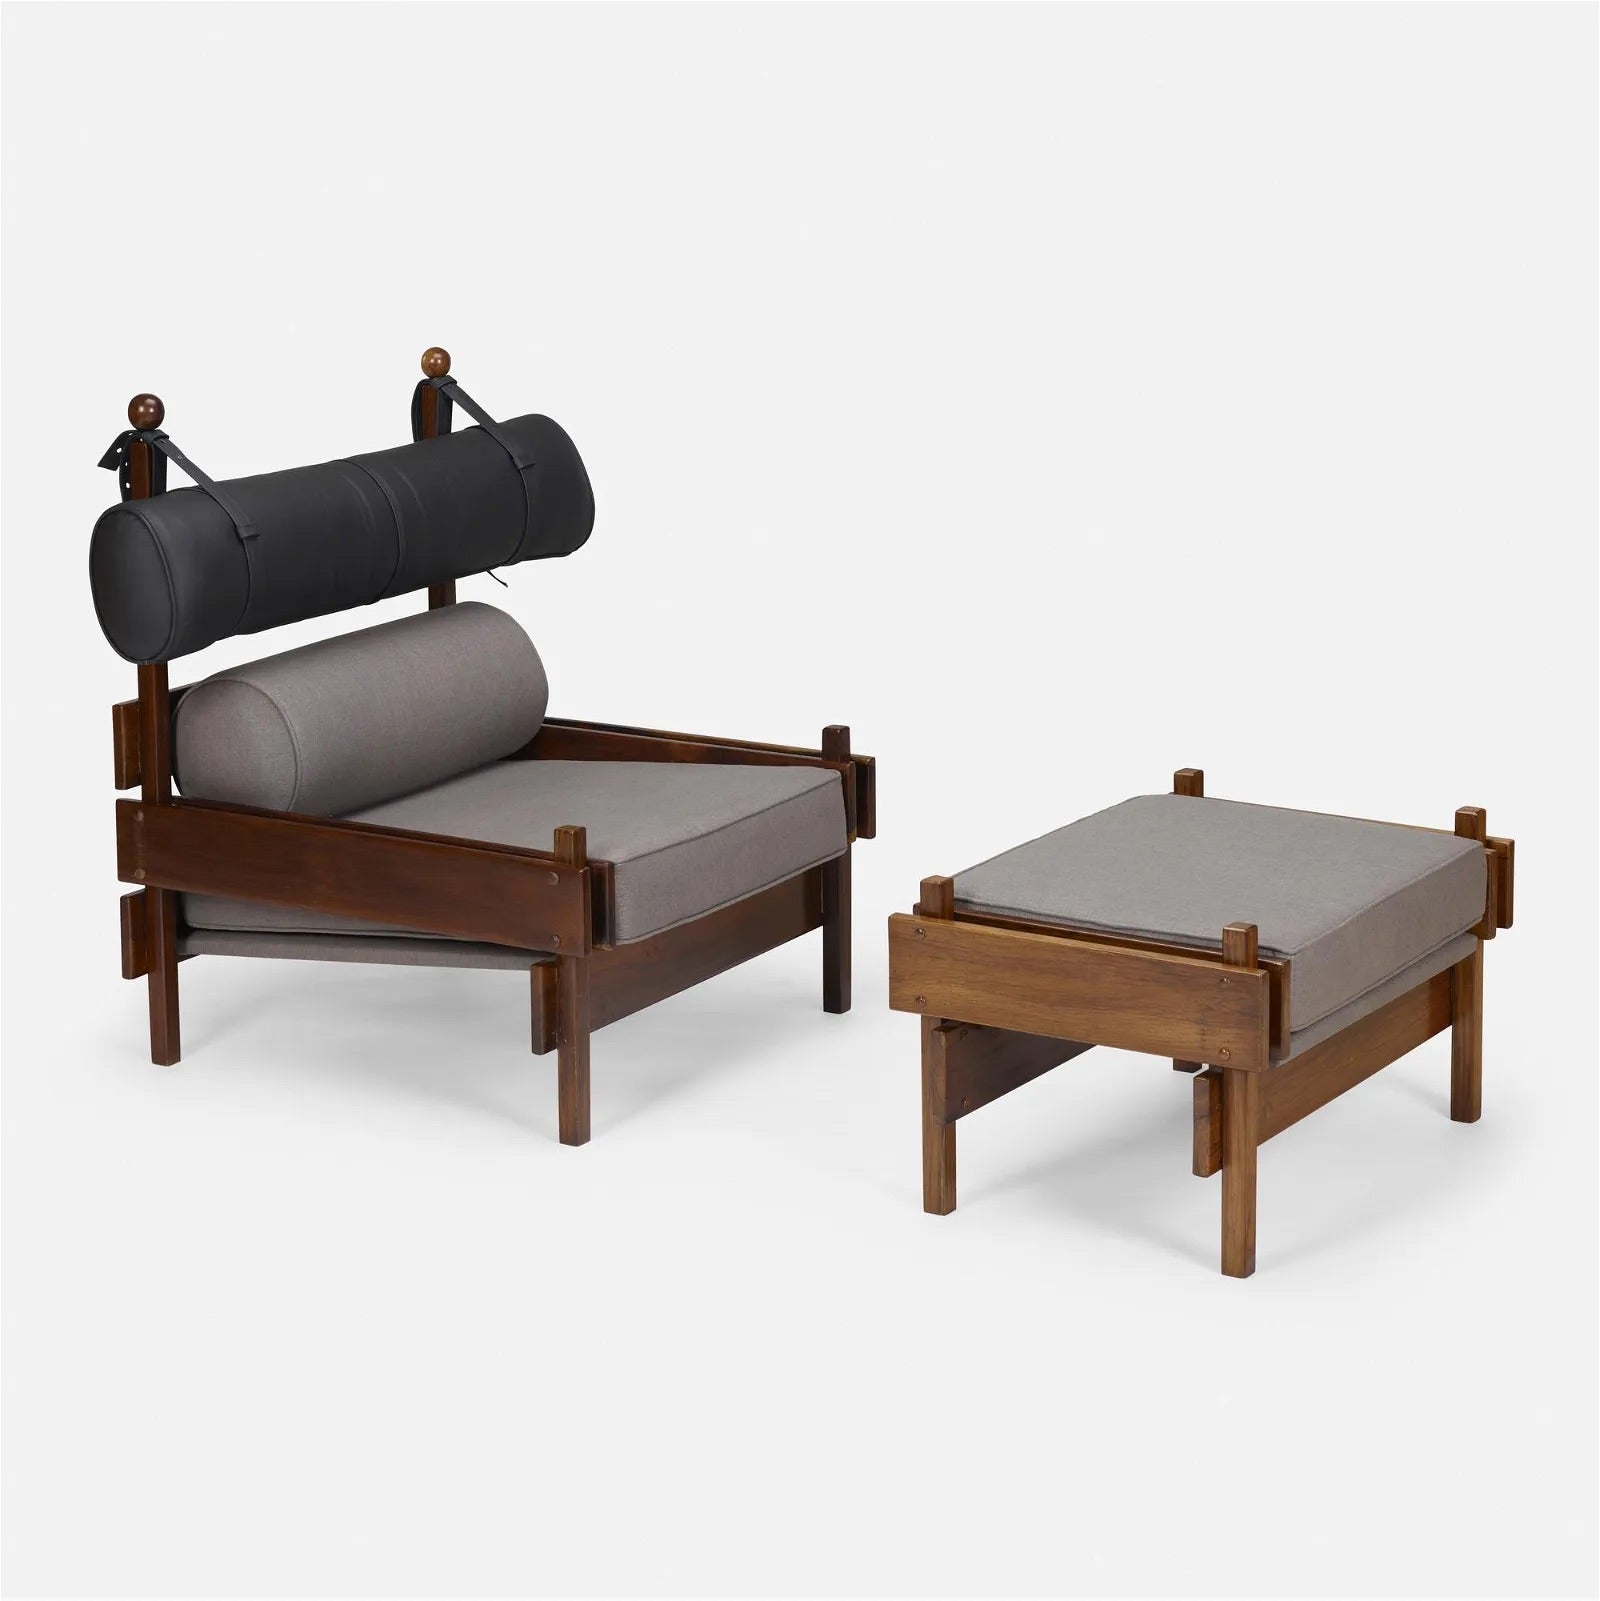 Sergio Rodrigues Tonico Lounge Chairs with Ottomans, 1960s Brazil